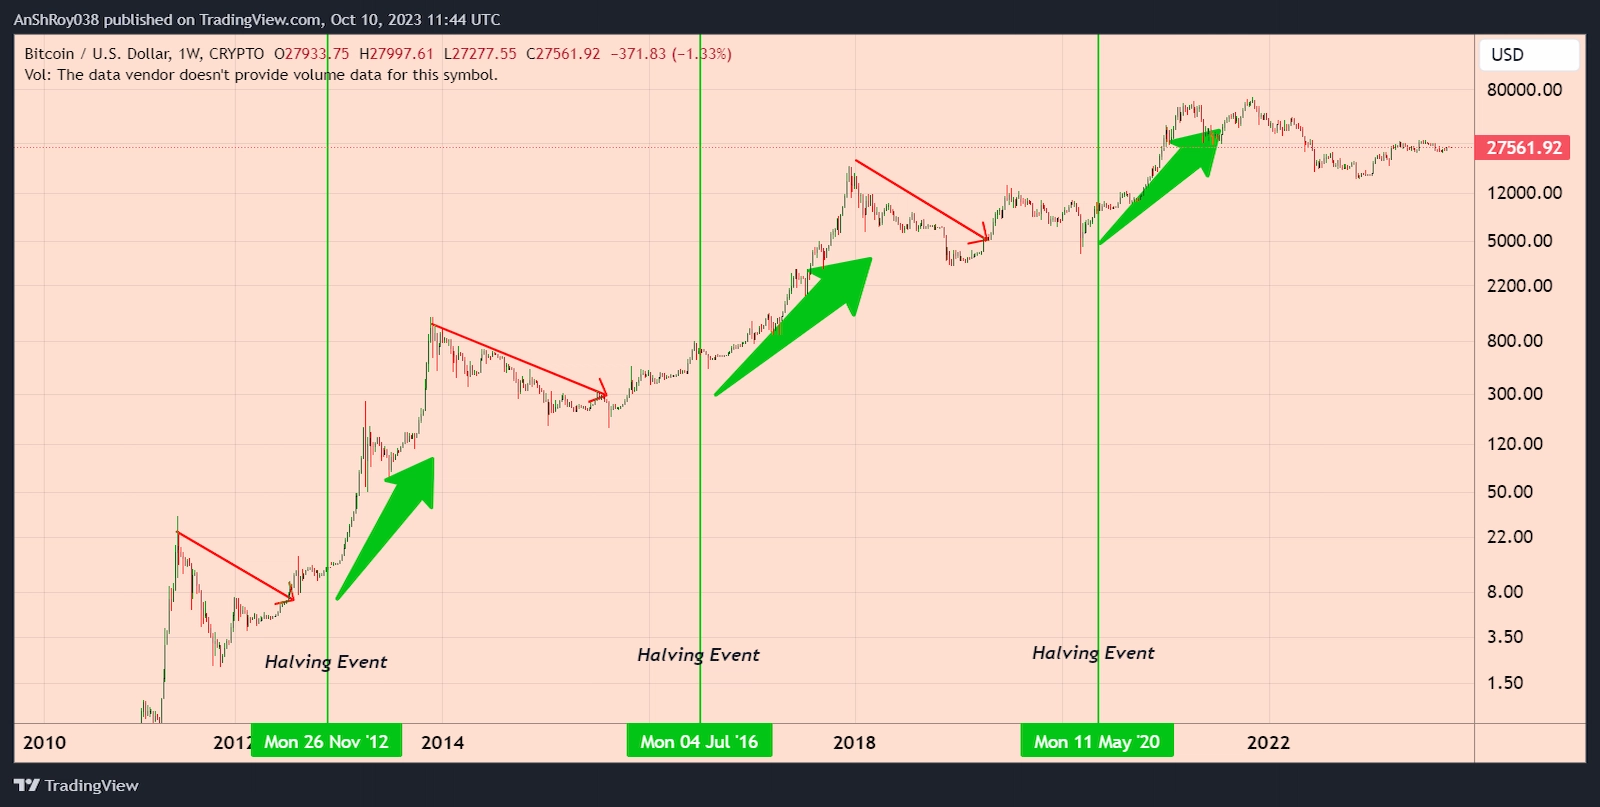 BTC price action before and after each halving.